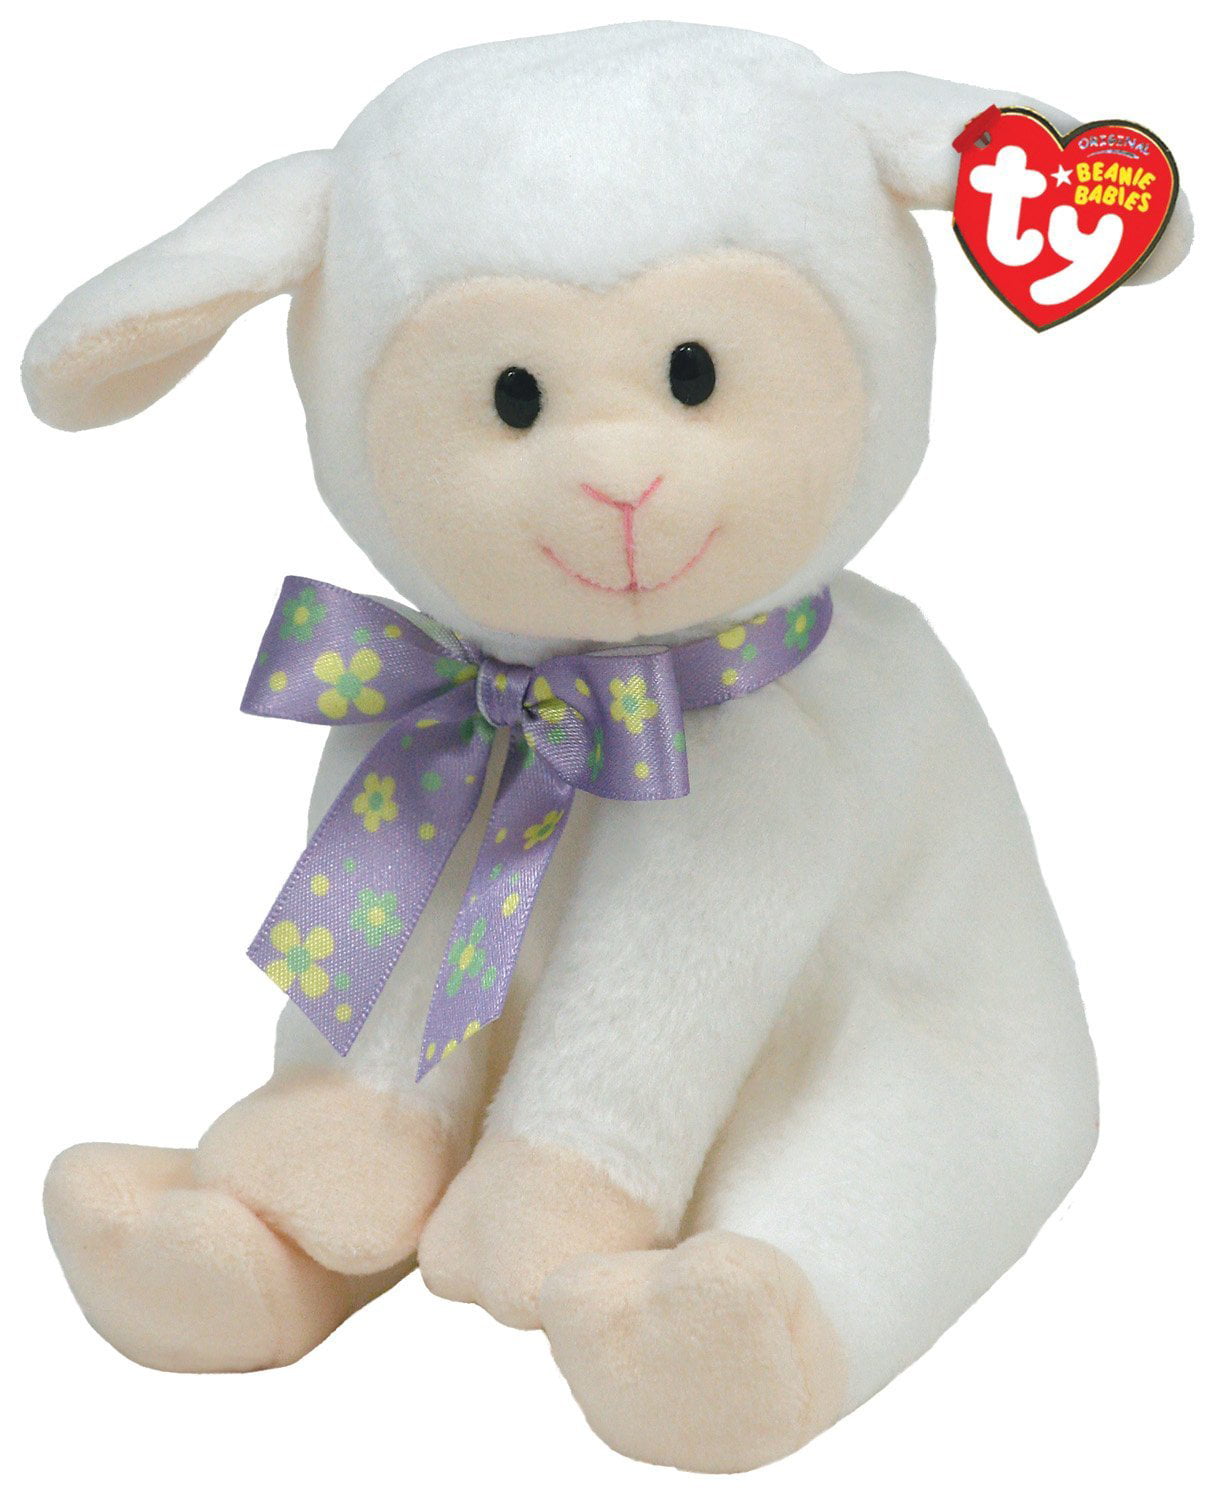 Fleecie 2000 Ty Beanie Babie 6in Easter Lamb Sheep 3up Boys Girls 04279 for sale online 